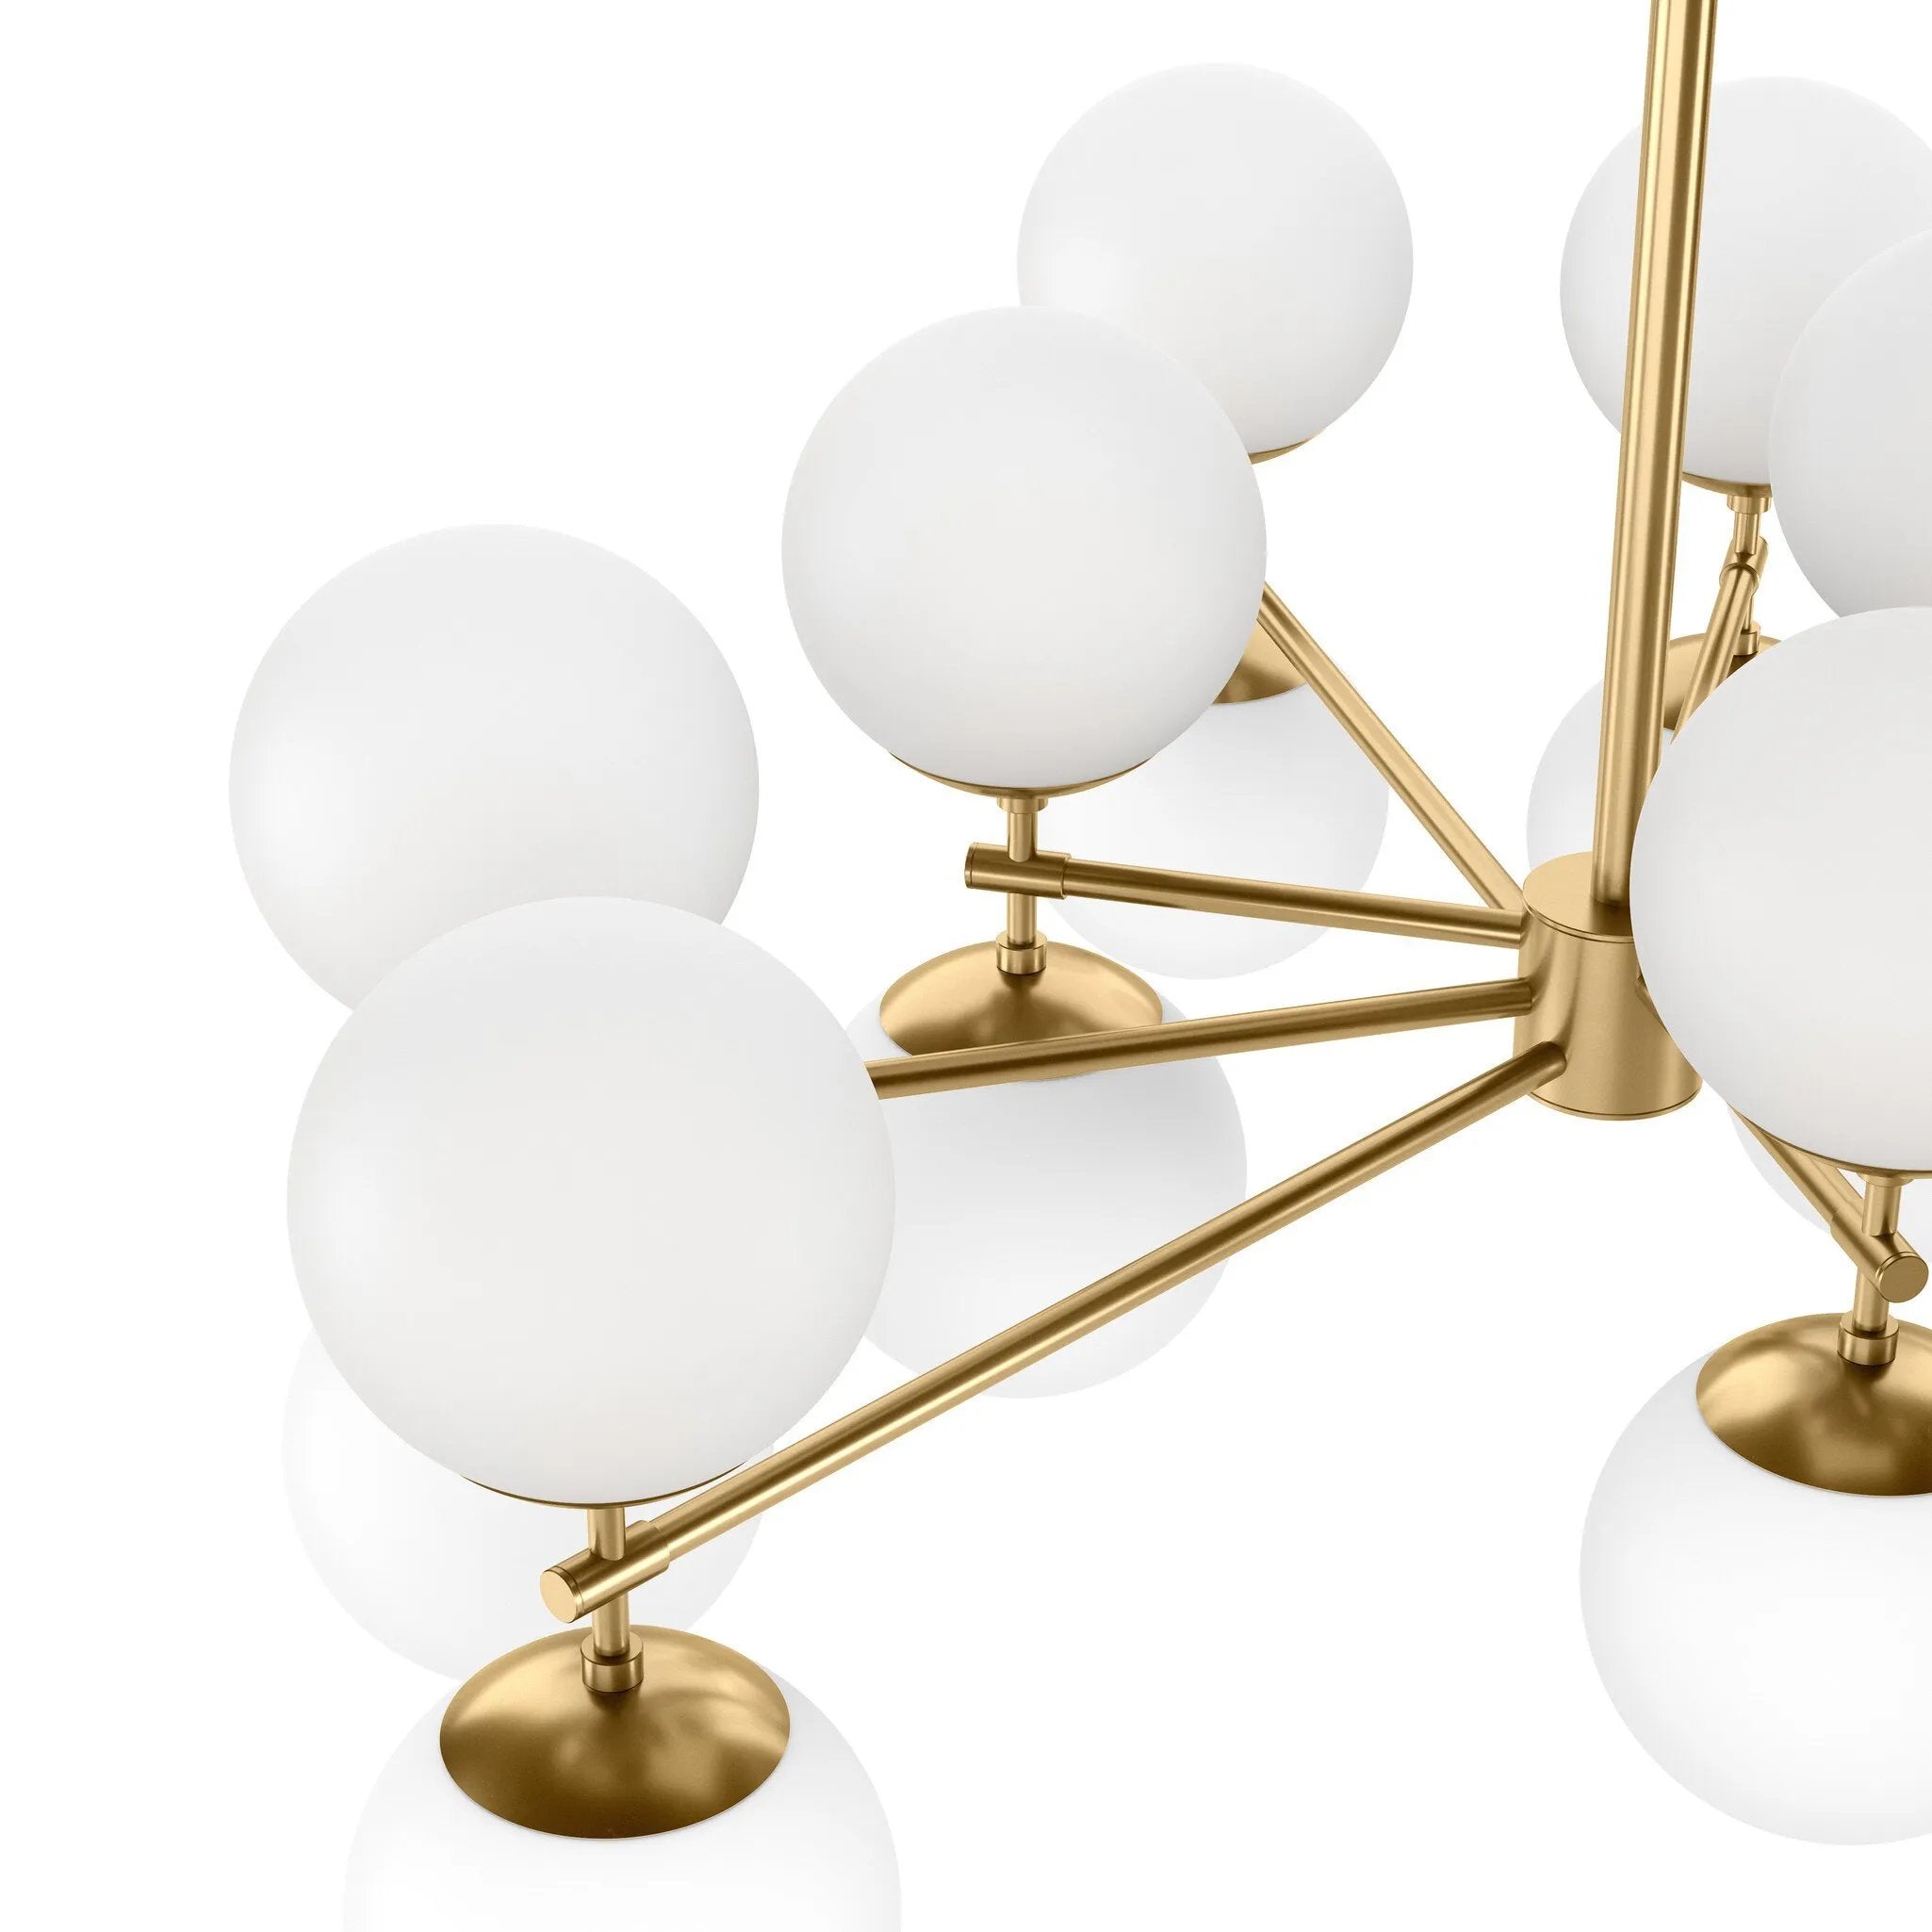 Matte glass spheres seem to extend and reach across smooth brass rods. Each globe is individually blown, shaped and sculpted by hand through a one-hour process. Matte glass is specially manufactured to evenly diffuse light. Brass and glass are 98% recyclable. Designed and sustainably crafted in Poland by Schwung.Overall Dimensions51.75"w x 51. Amethyst Home provides interior design, new home construction design consulting, vintage area rugs, and lighting in the Alpharetta metro area.